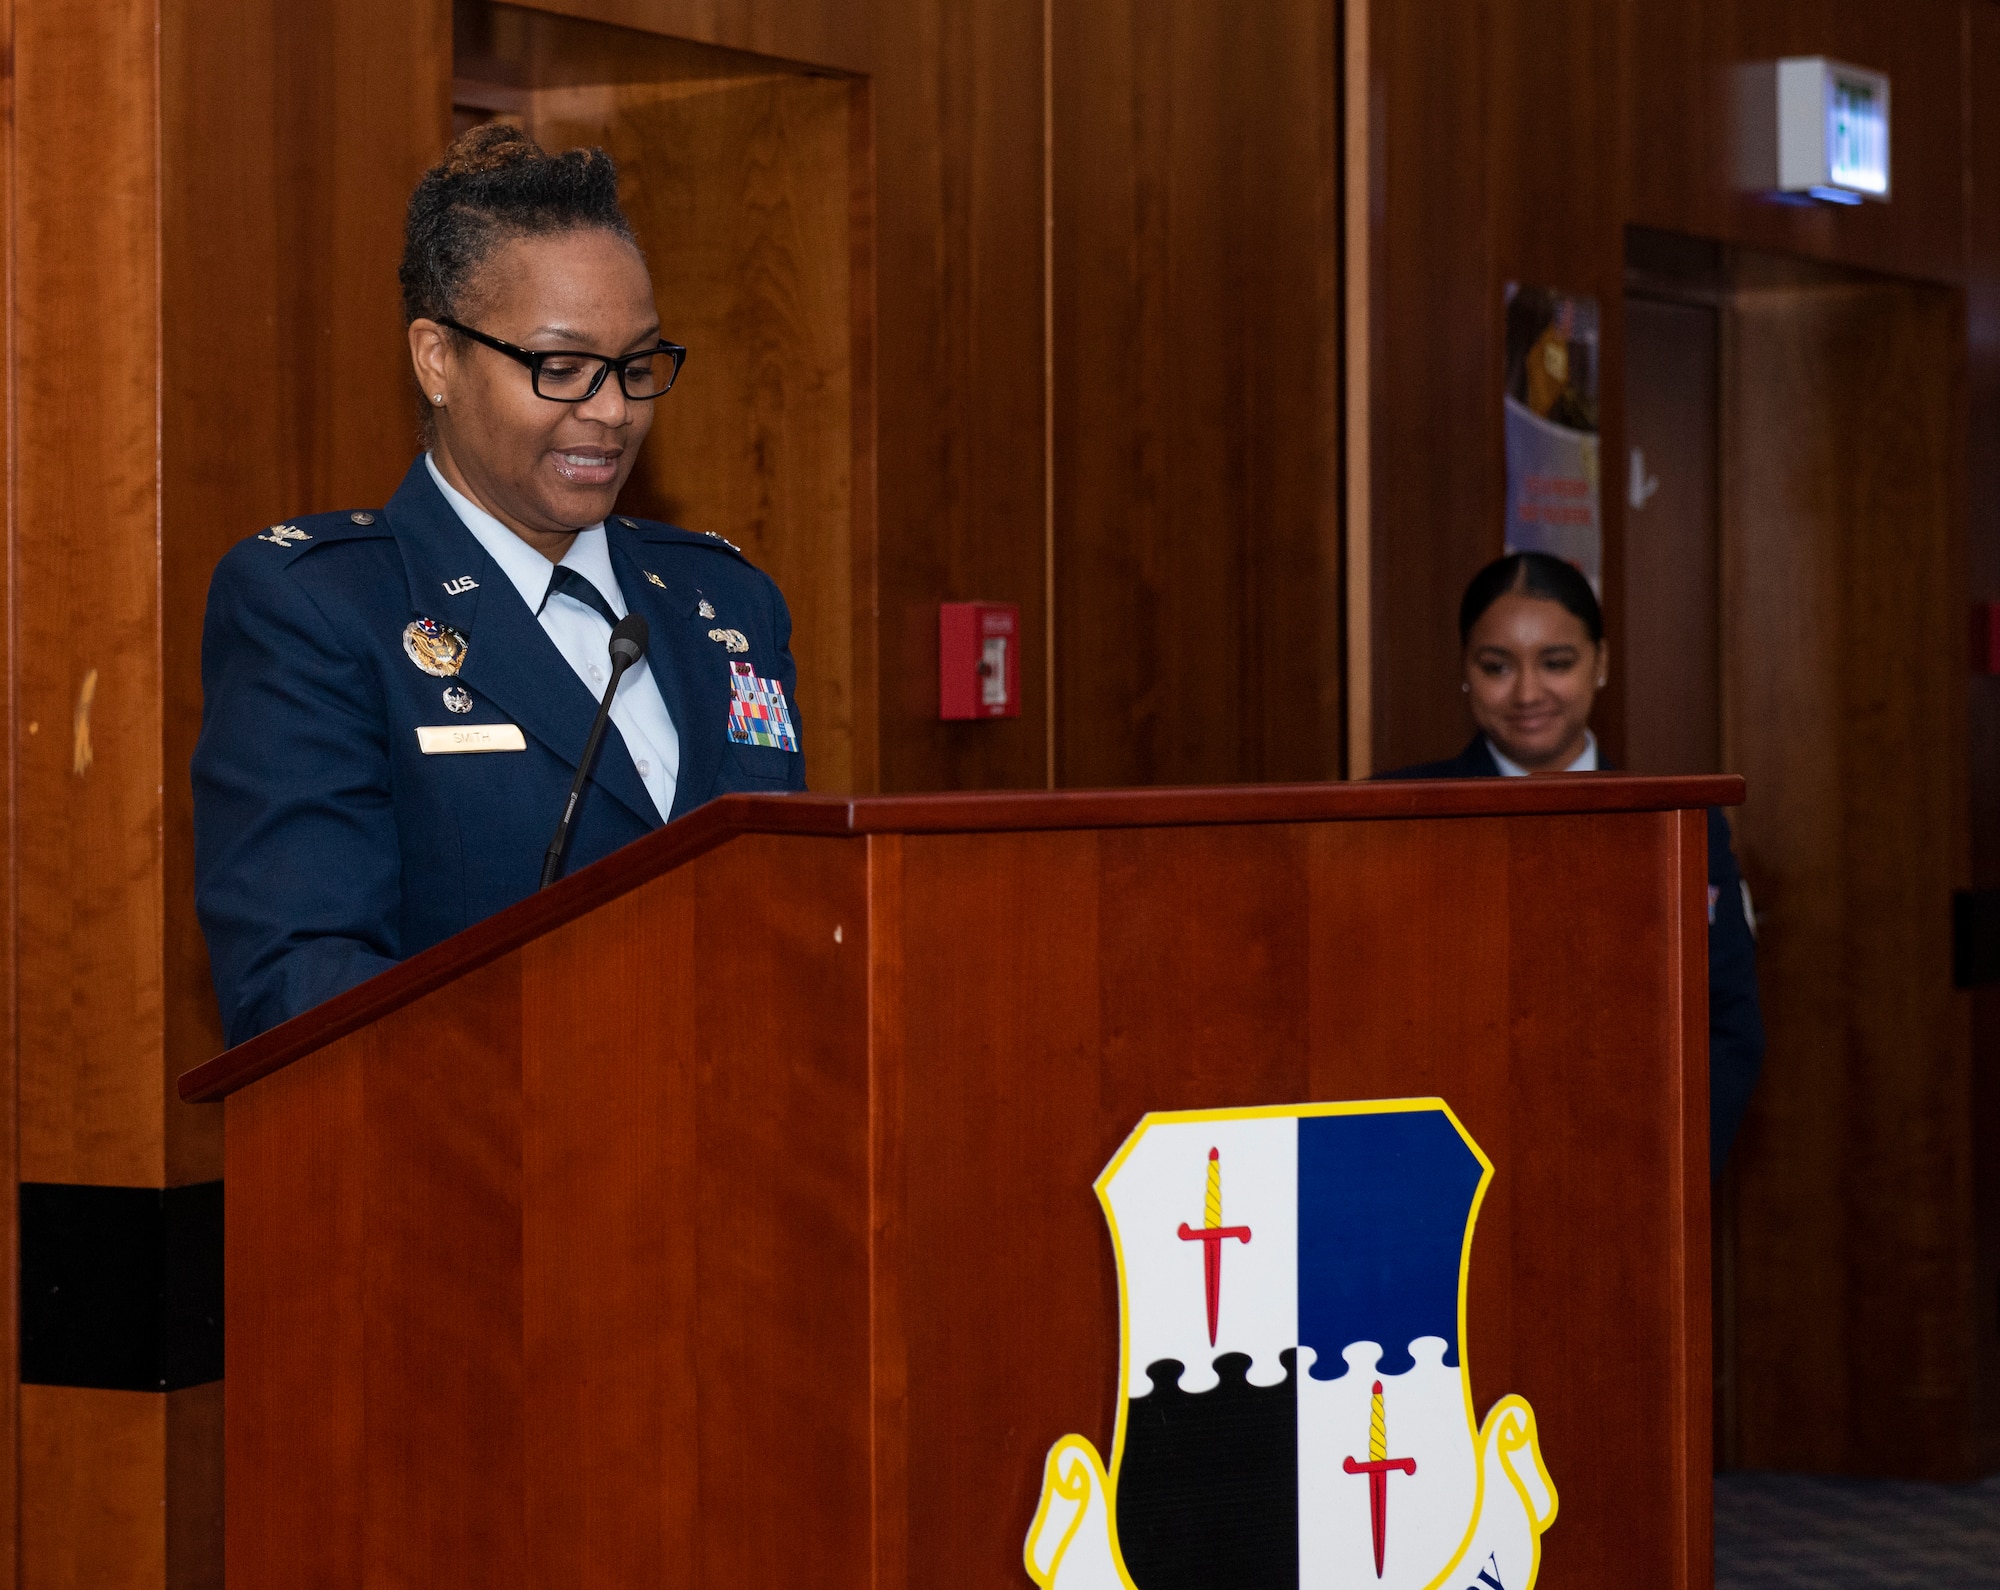 U.S. Air Force Col. Alisha Smith, 52nd Fighter Wing Medical Group commander, gives a speech at the annual Black History Month Luncheon at Spangdahlem Air Base, Germany, Feb. 24, 2020. Smith's speech detailed her inspiration during Black History Month and spoke of her own personal triumphs as an African-American woman in the armed forces. (U.S. Air Force photo by Airman 1st Class Alison Stewart)